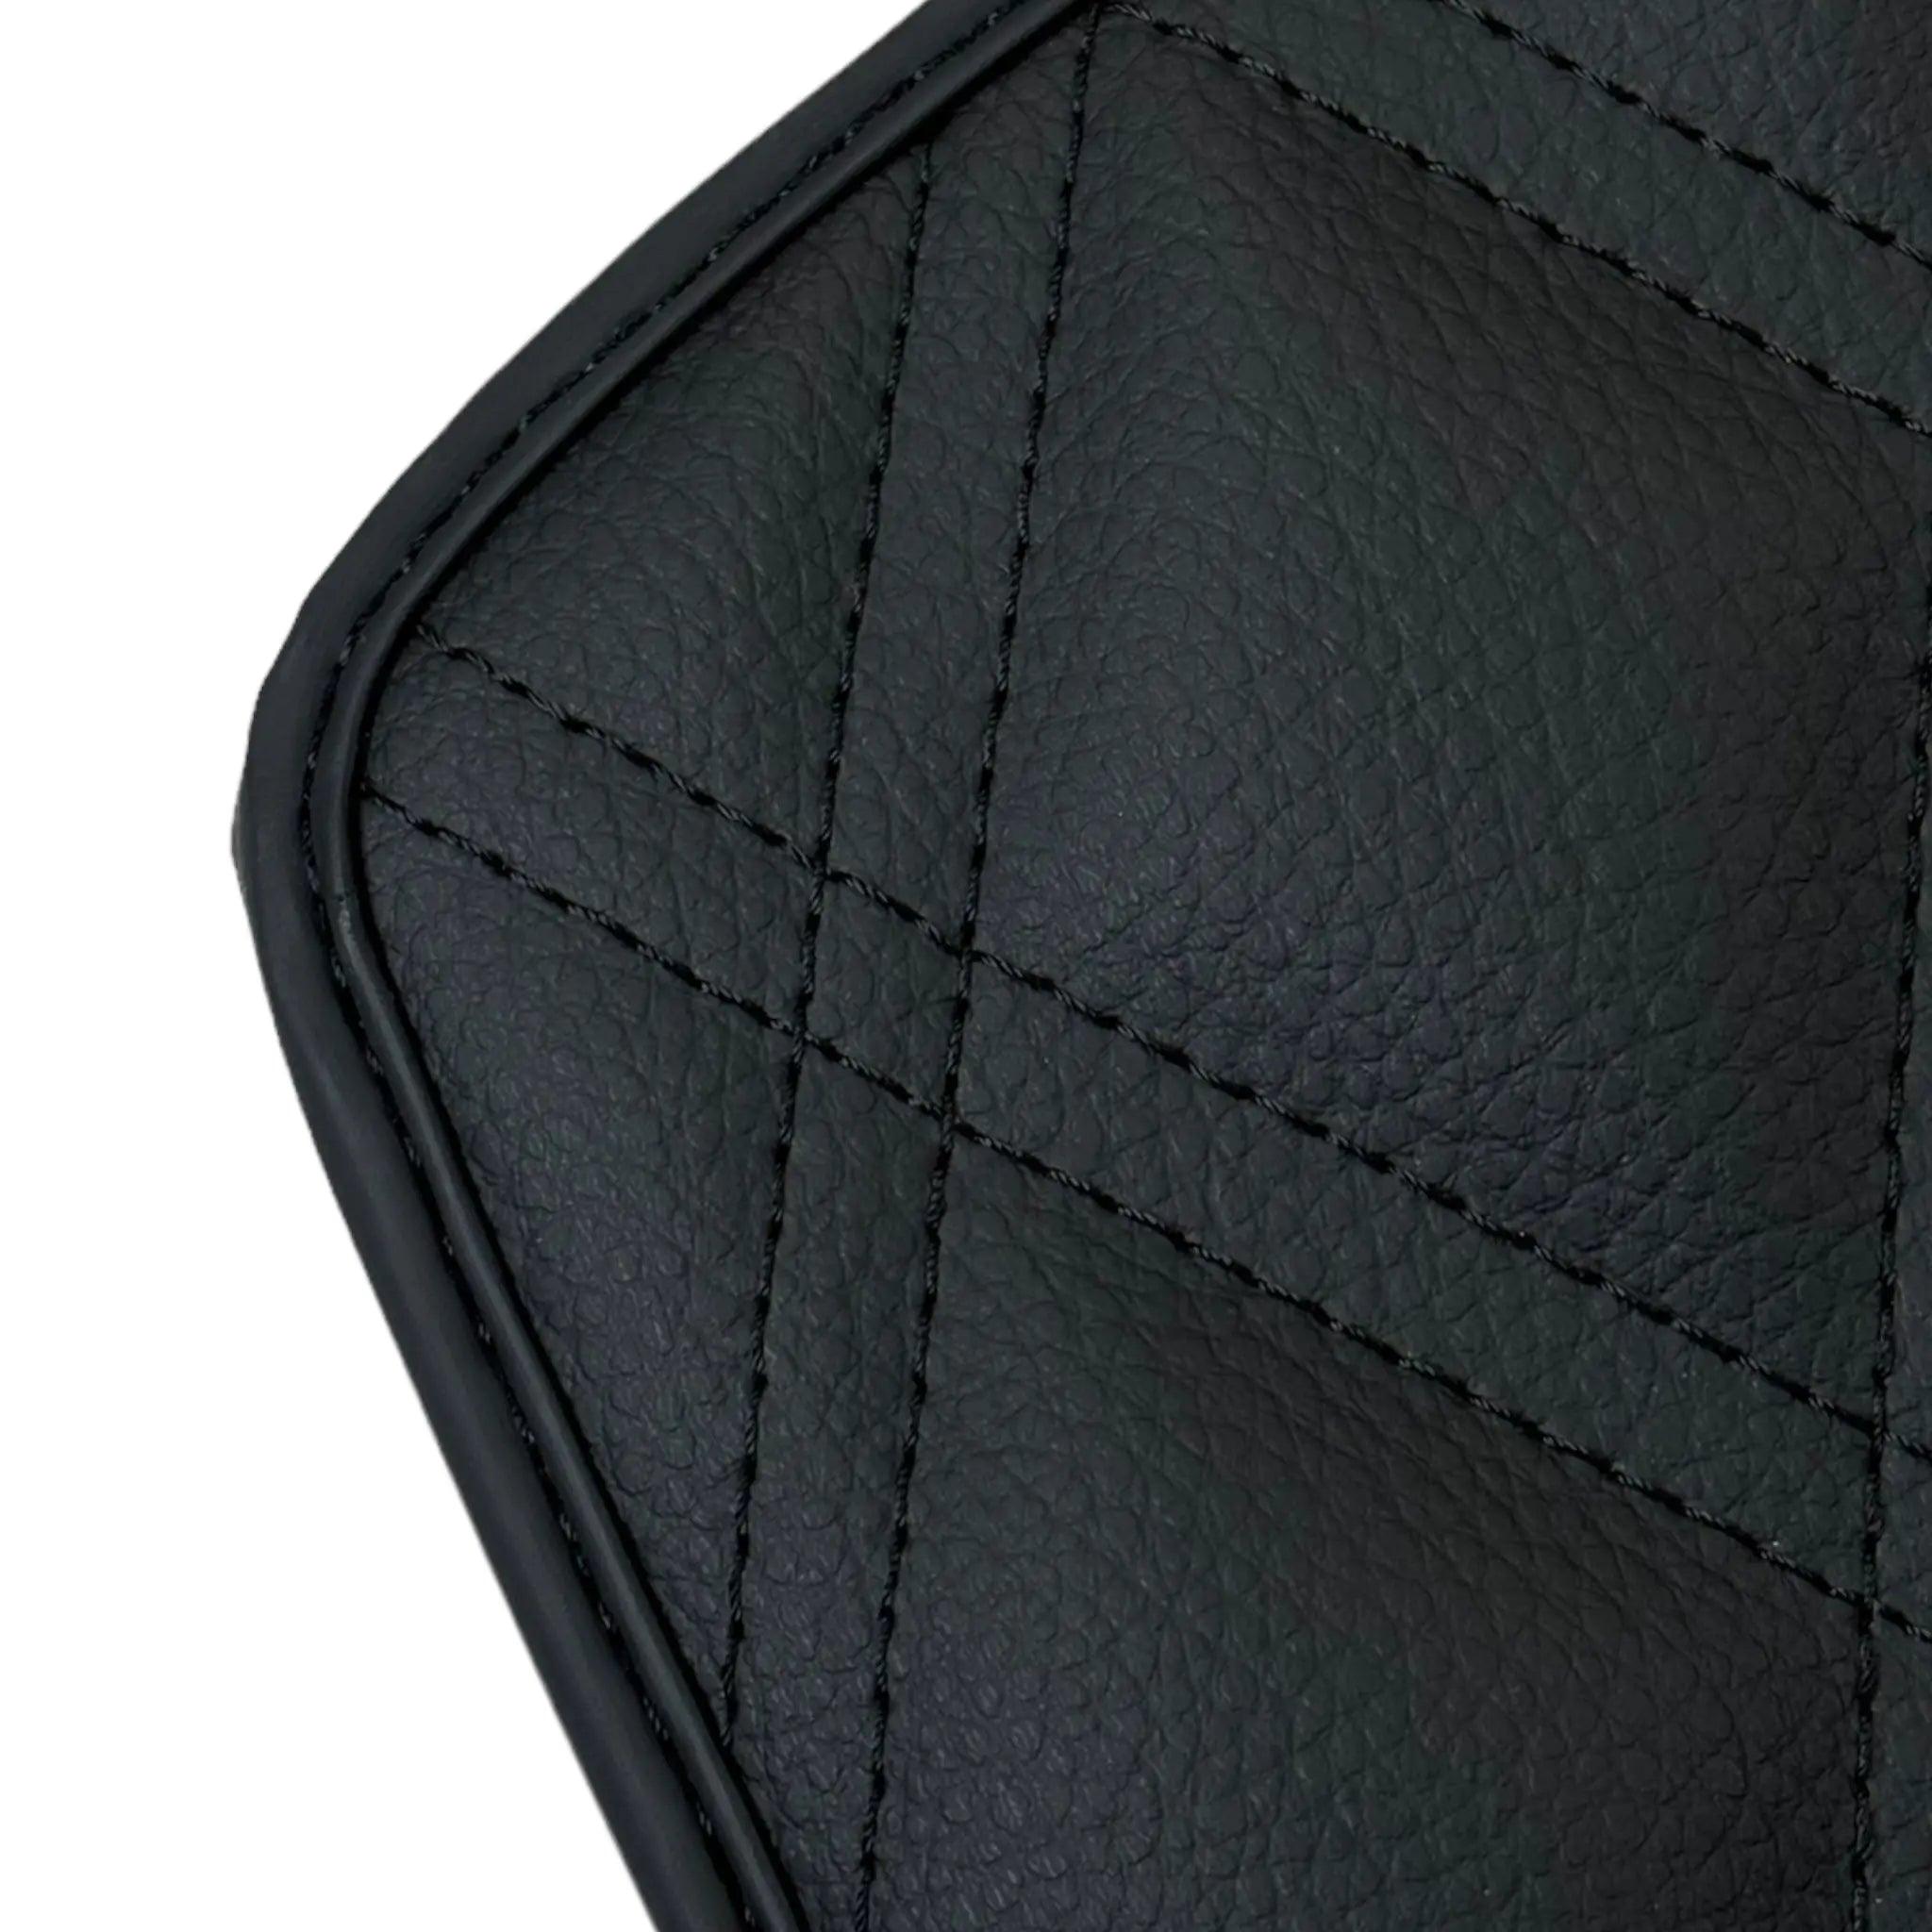 Black Floor Mats for Bentley Continental GTC (2006–2011) with Leather | ER56 Design - AutoWin